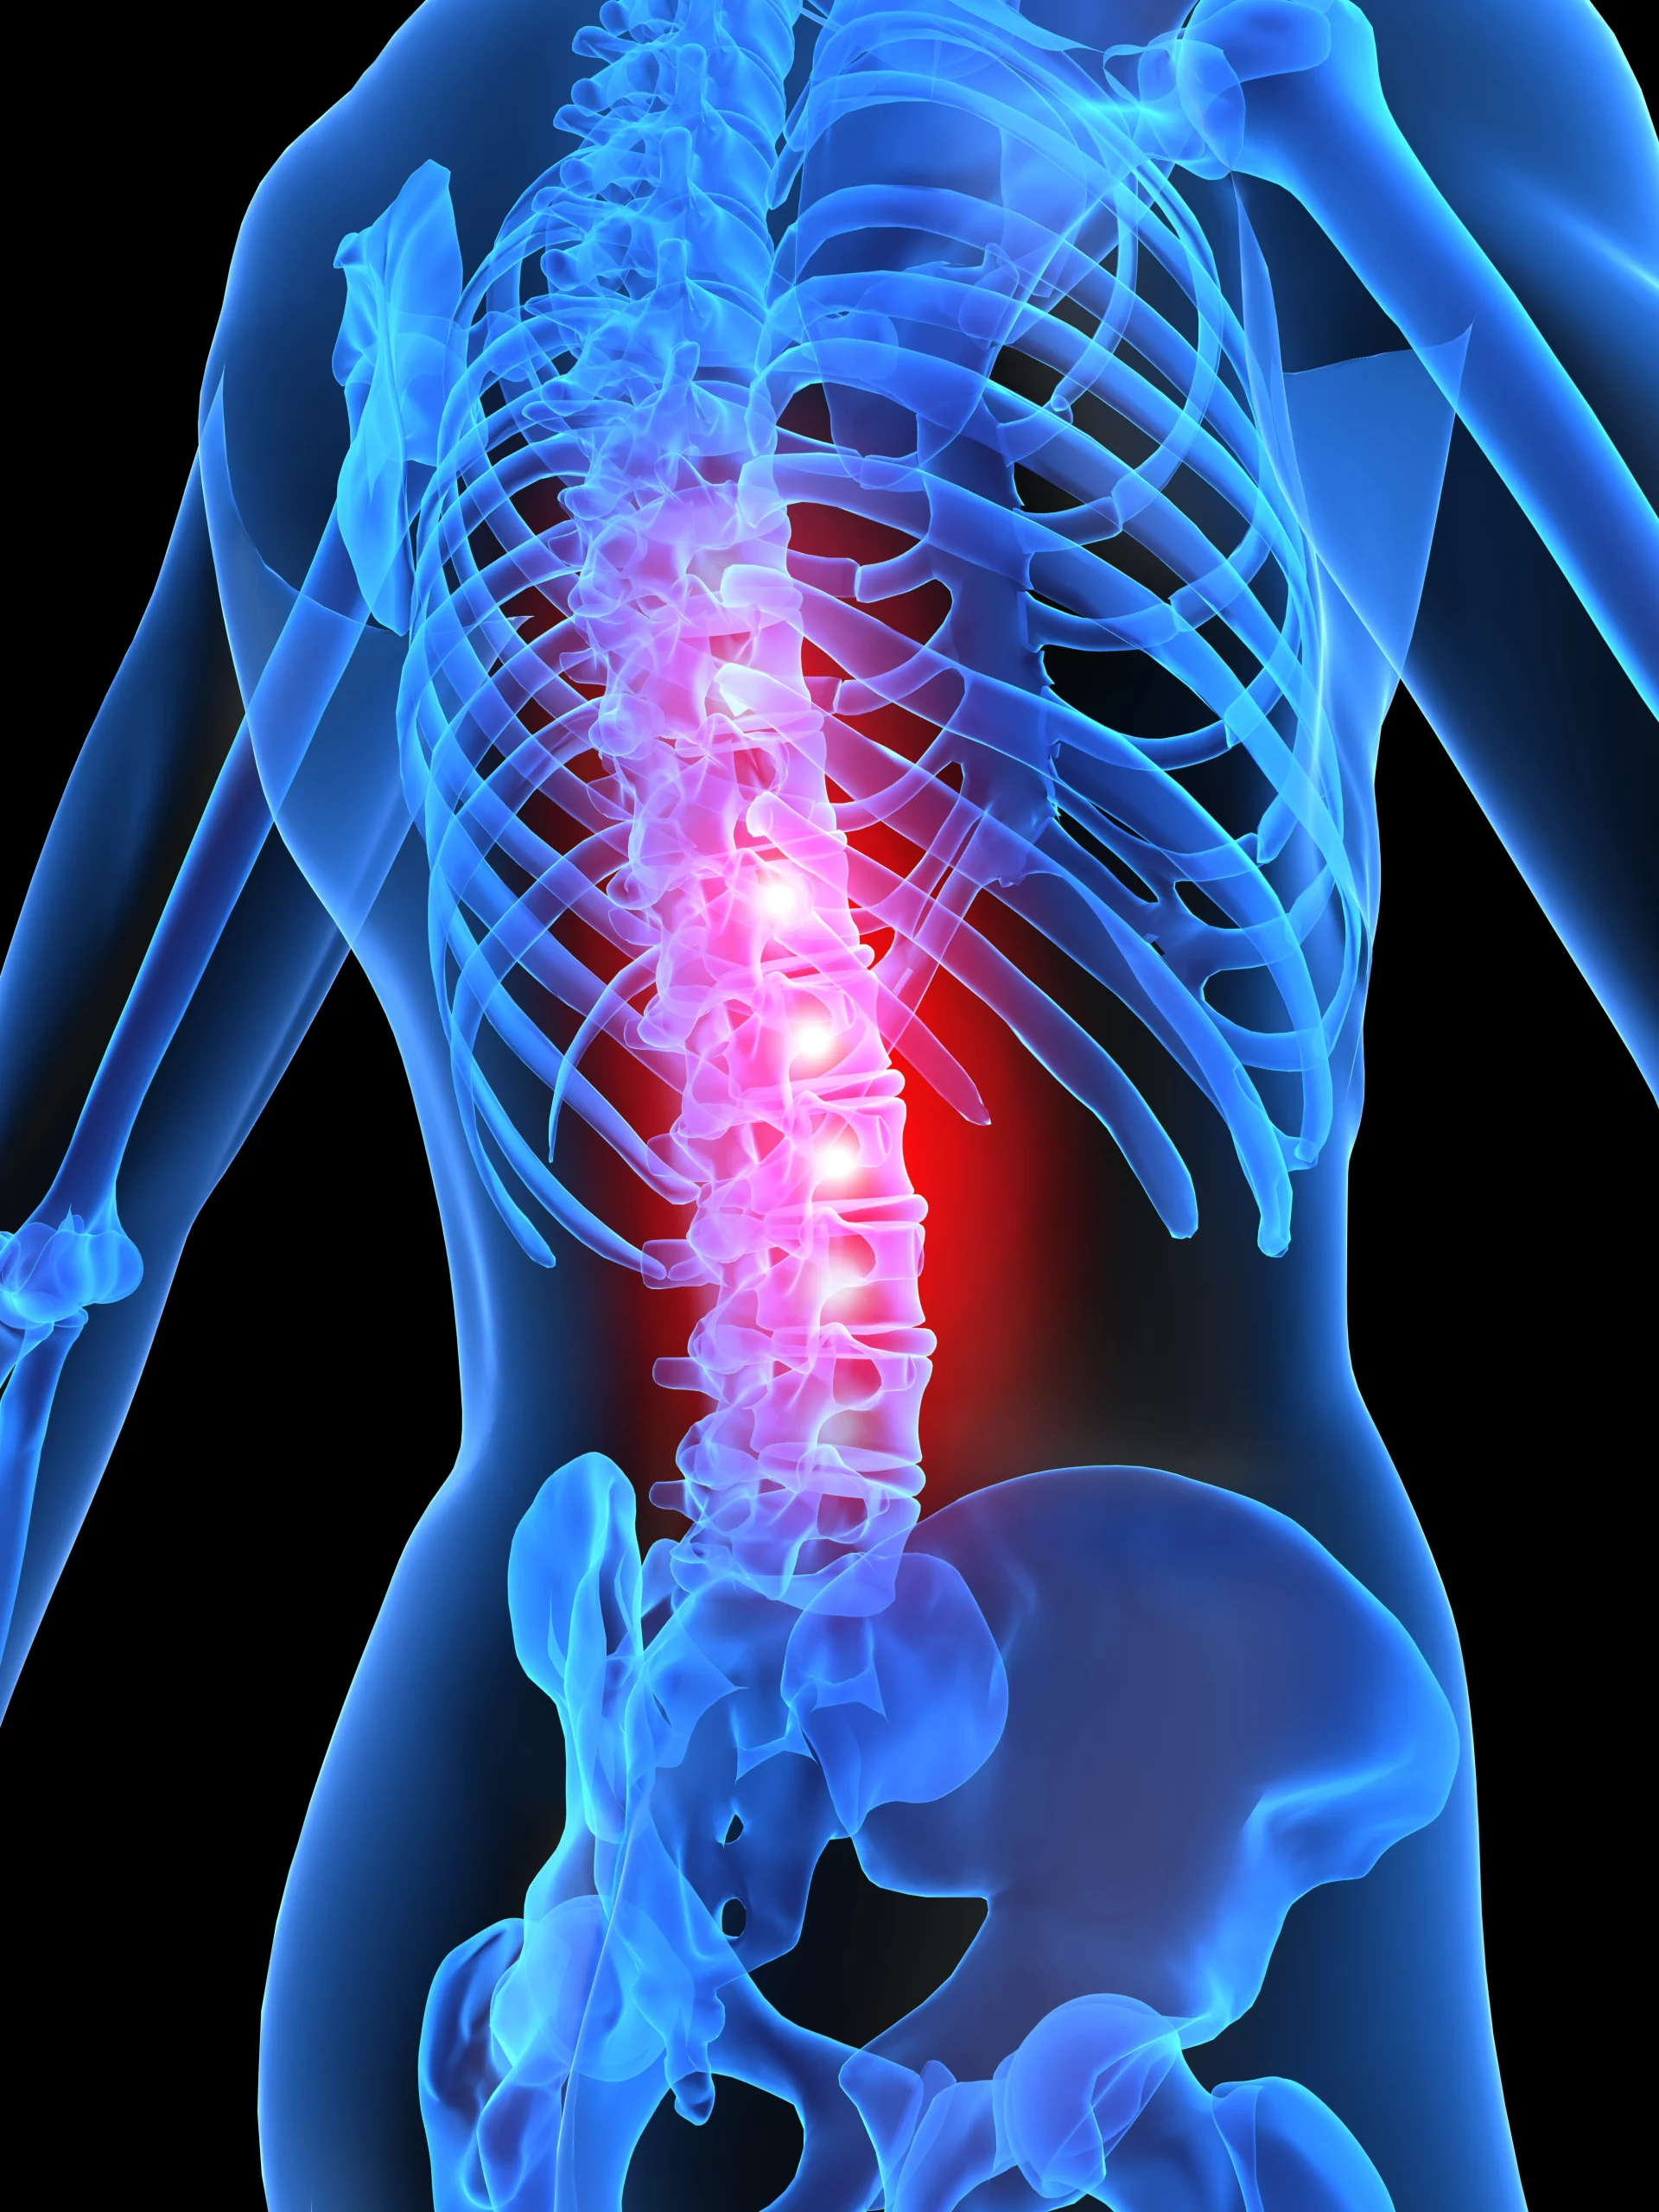 Herniated Discs After a Car Accident